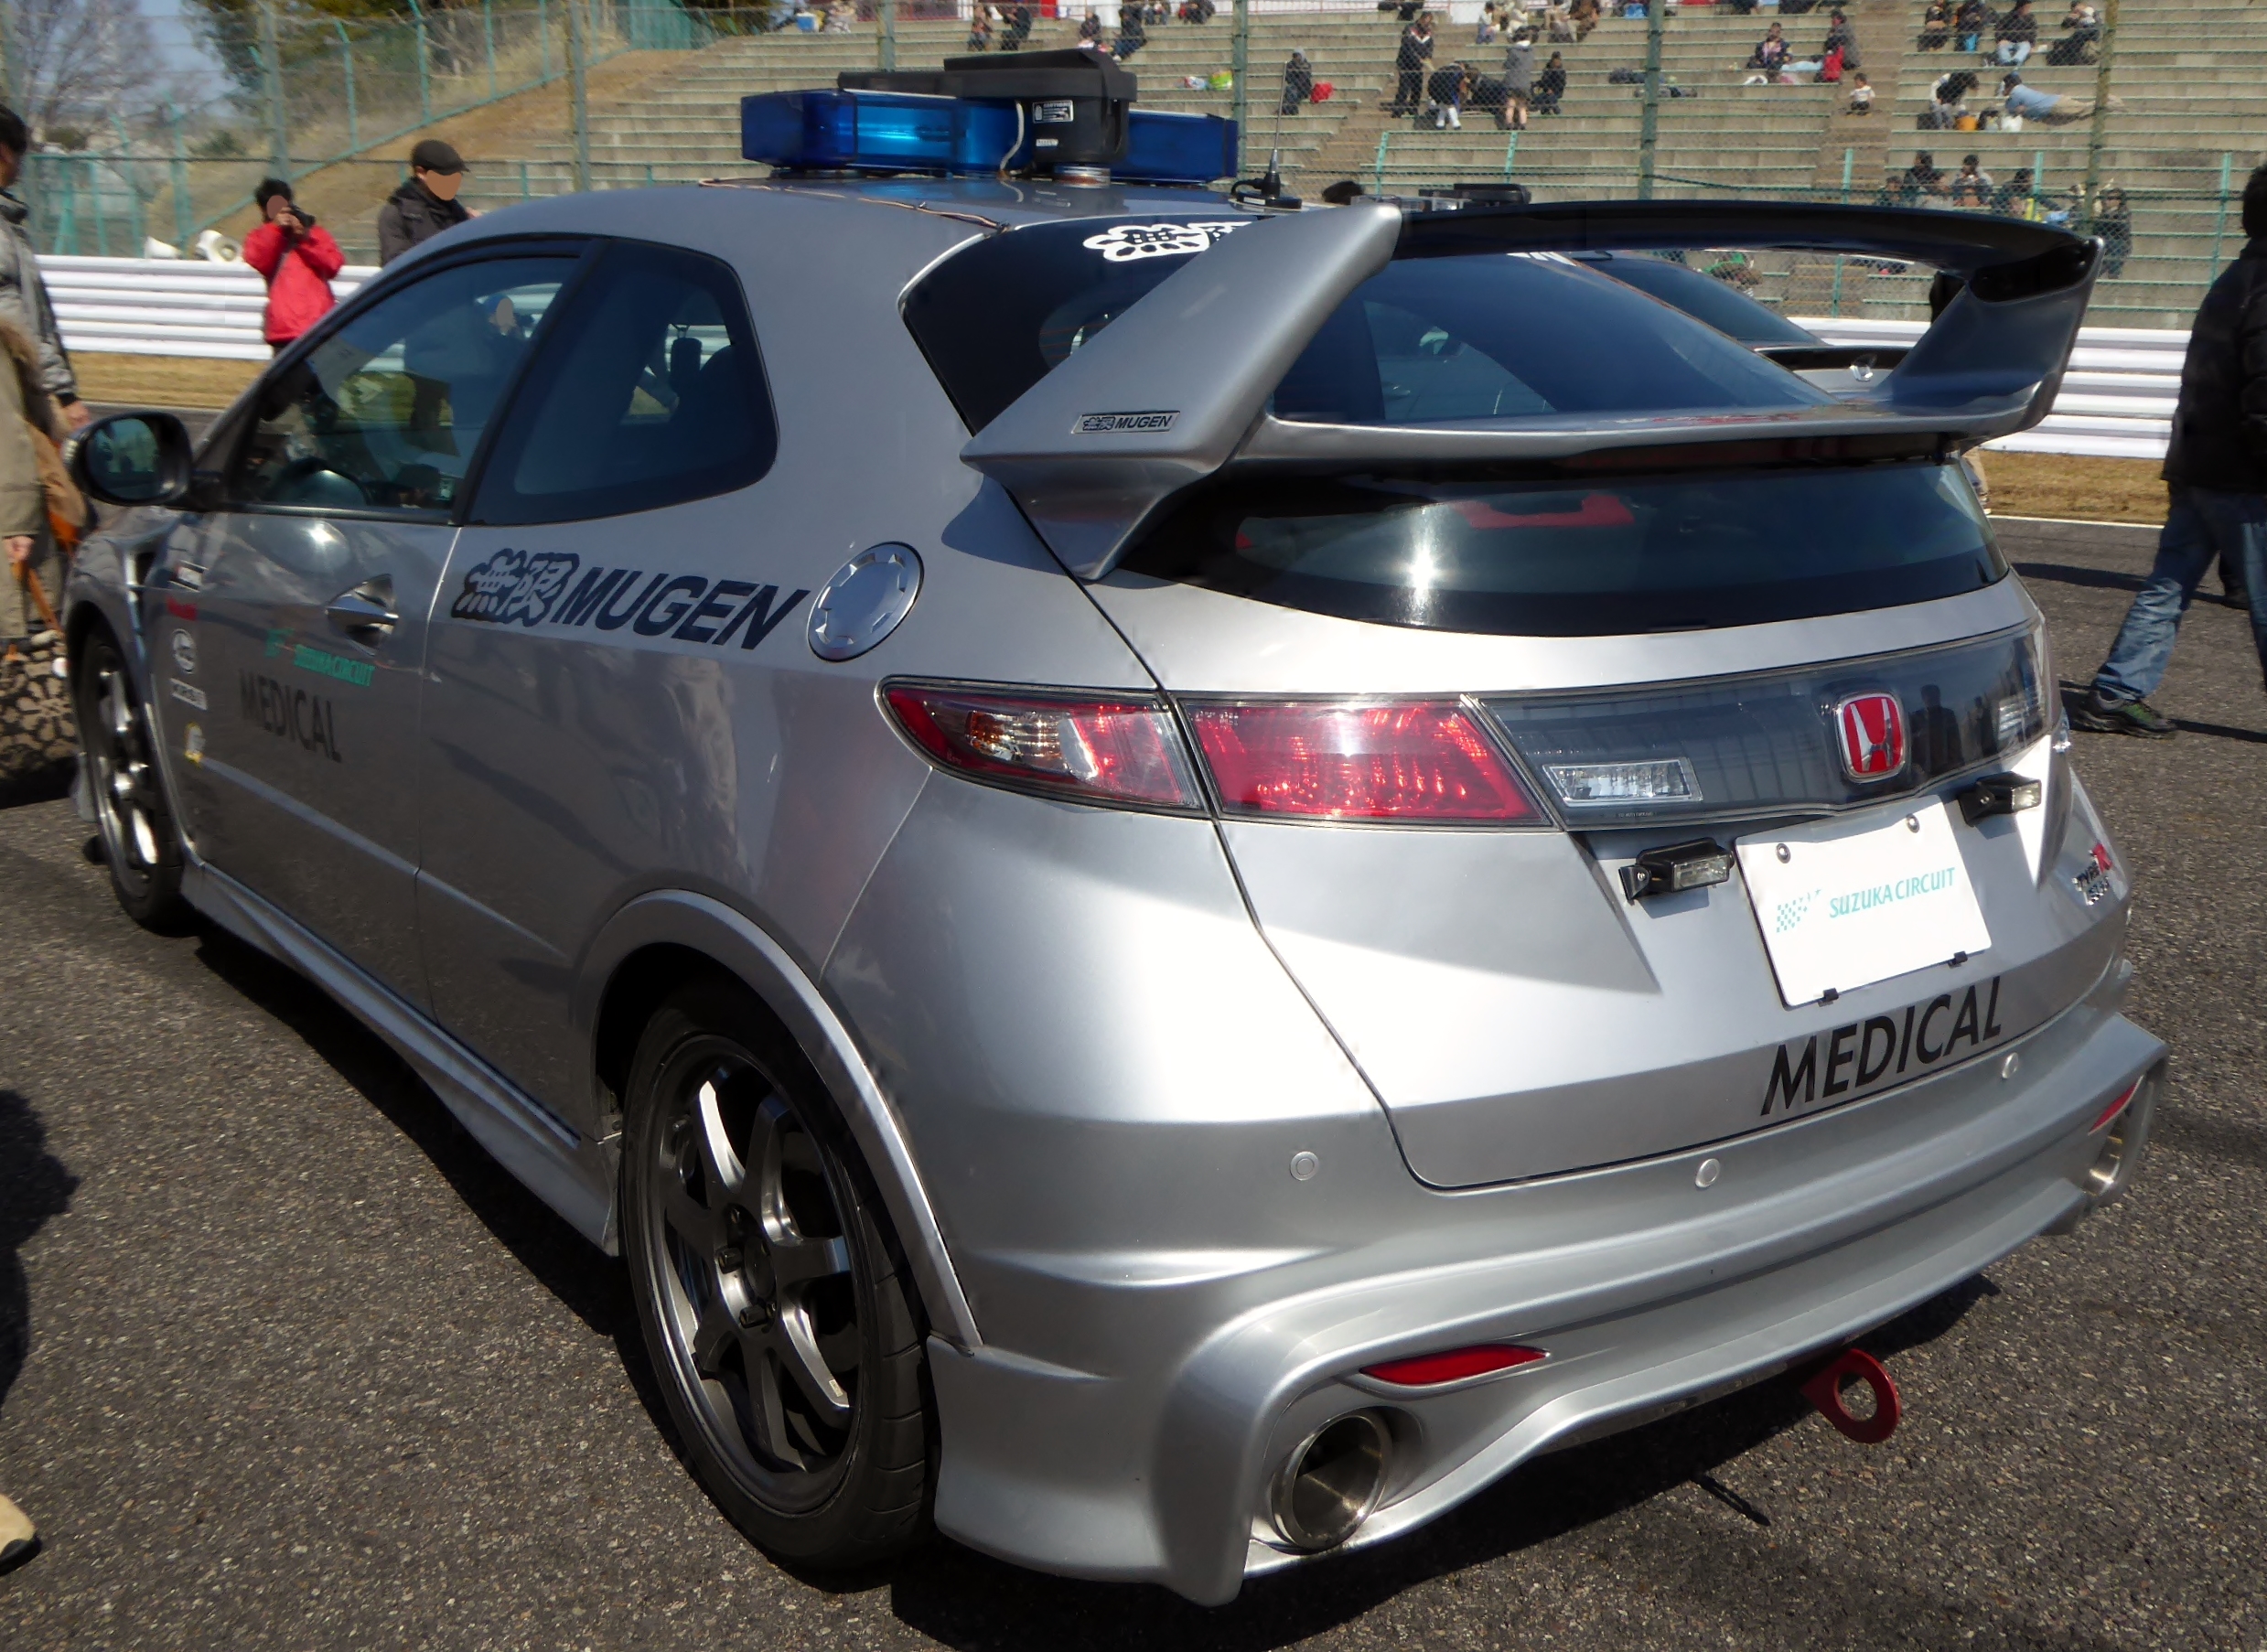 File The Rearview Of Mugen Civic Type R Euro Fn2 Used As A Medical Car Of Suzuka Circuit Jpg Wikimedia Commons